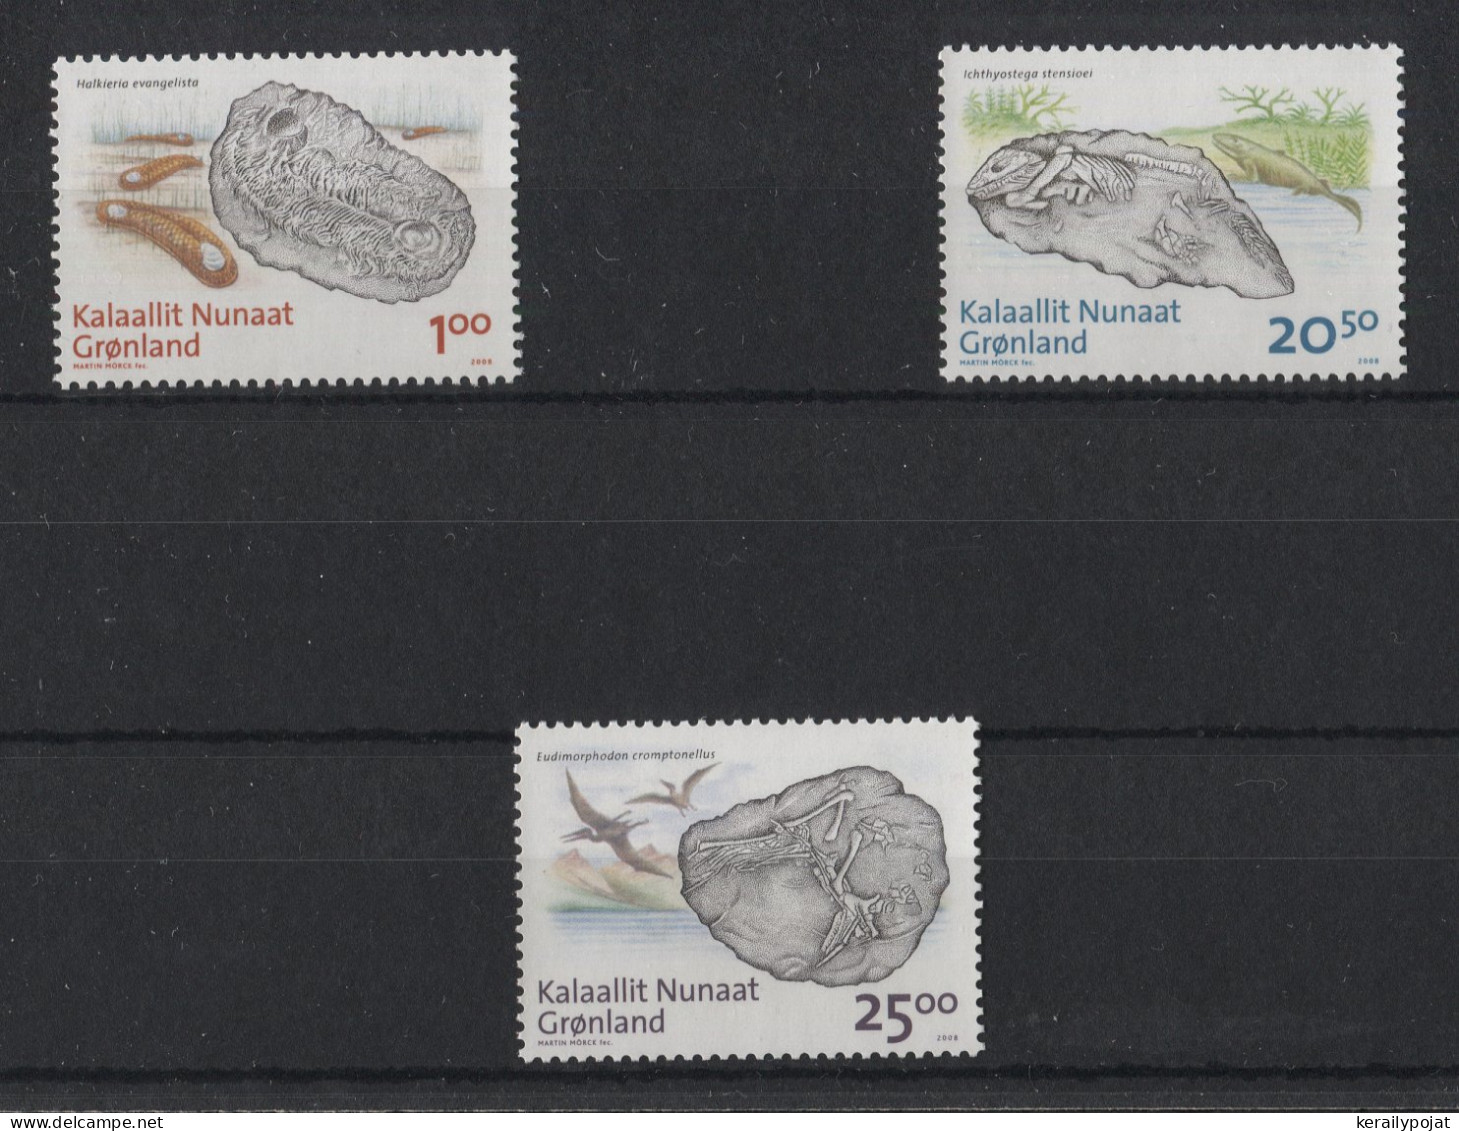 Greenland - 2008 Greenland Fossil Finds MNH__(TH-23170) - Nuevos